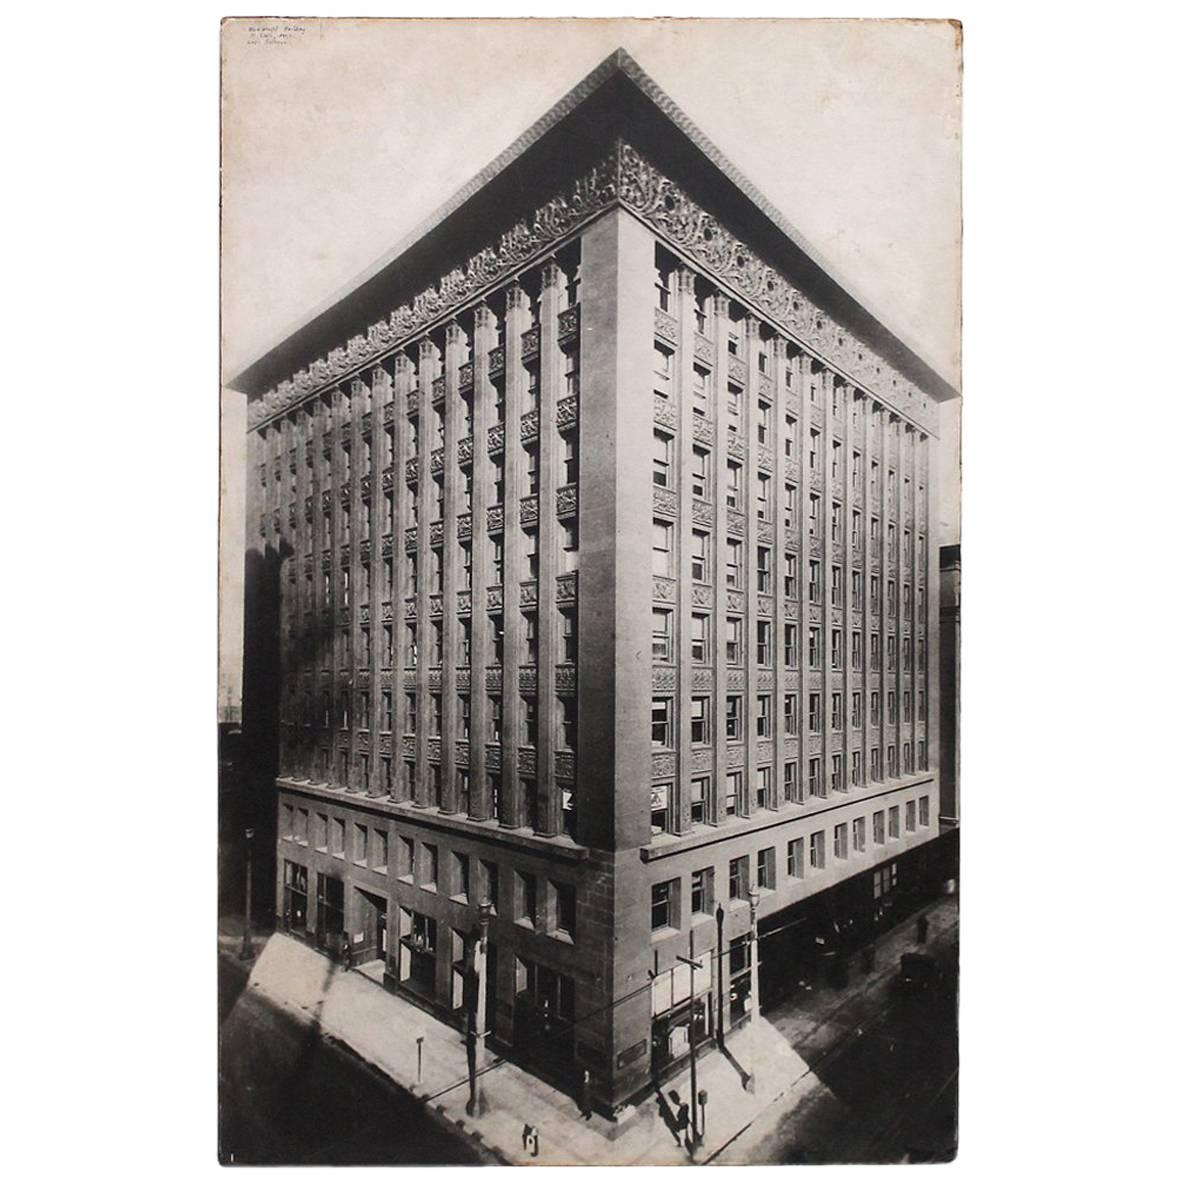 Large Format MOMA Exhibited Photograph of Louis Sullivan's Wainwright Building